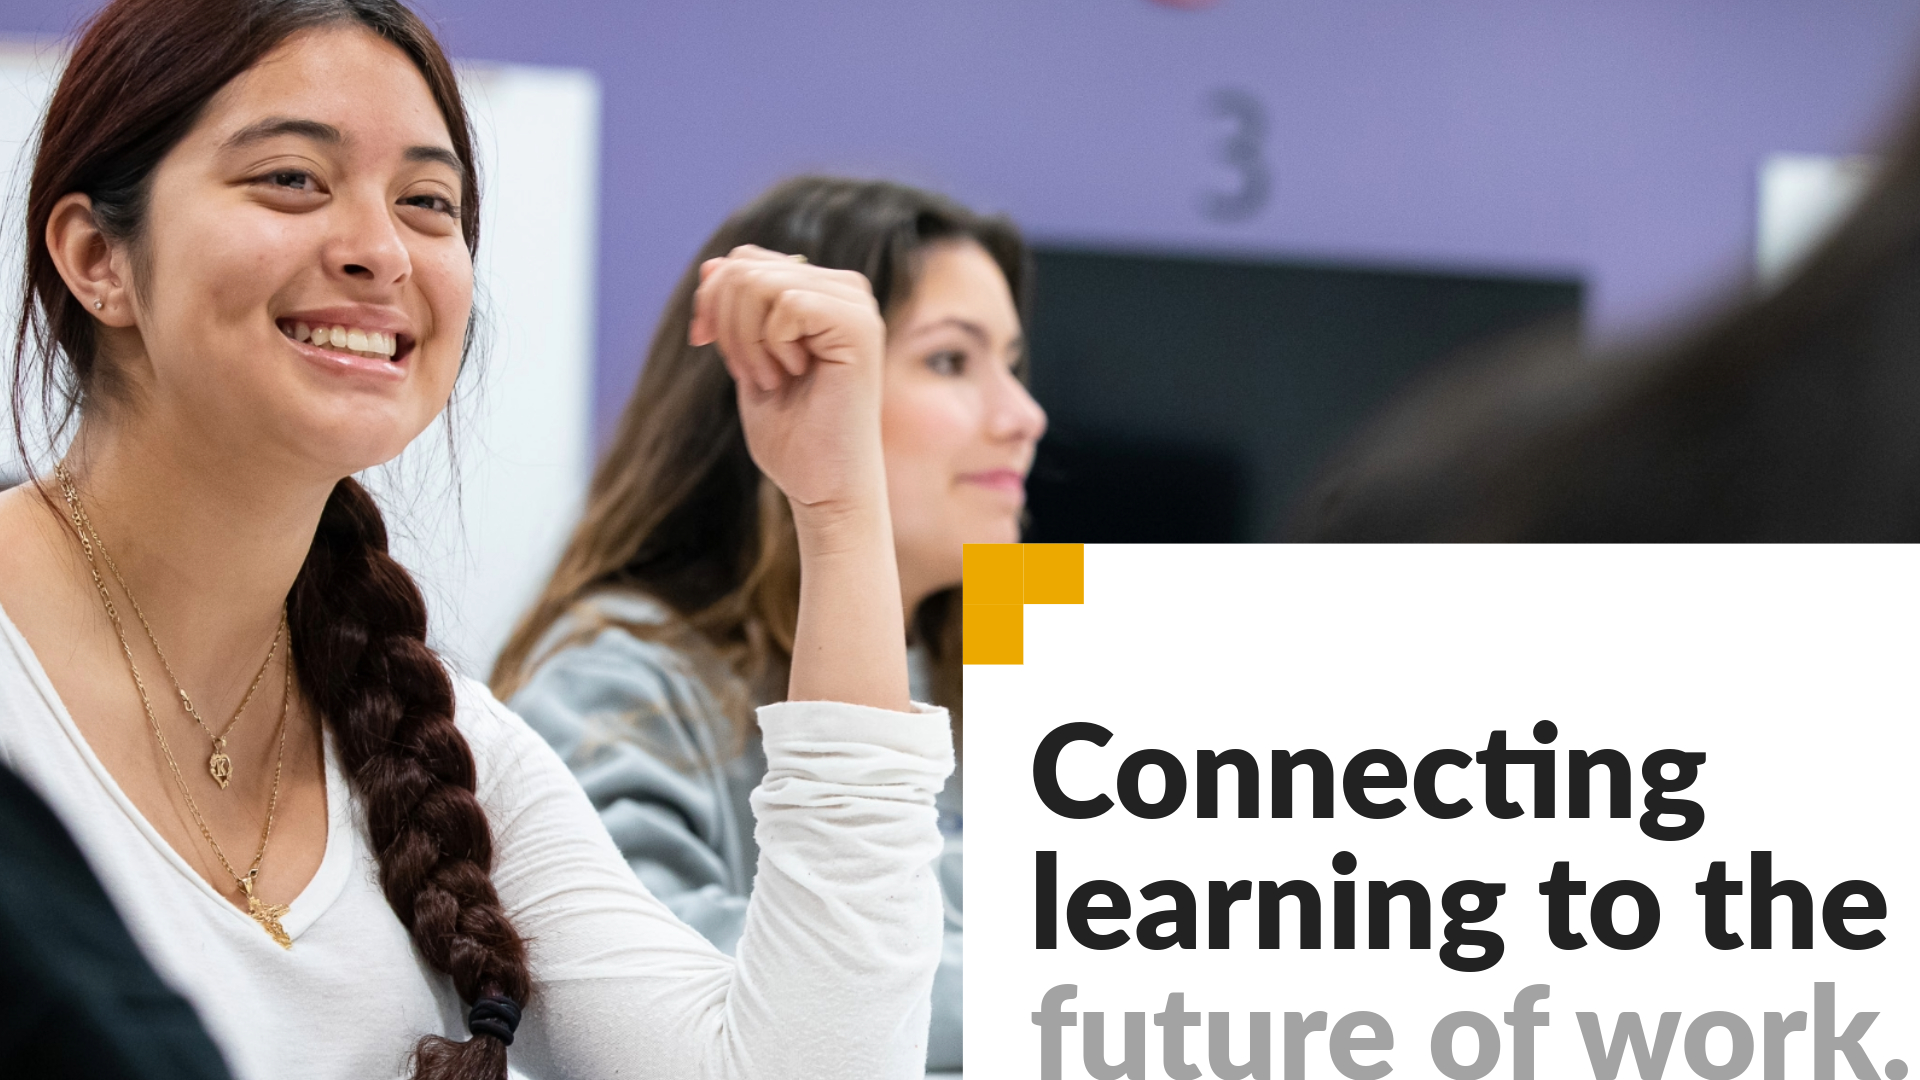 Connecting learning to the future of work. Image shows student smiling and looking off camera. 